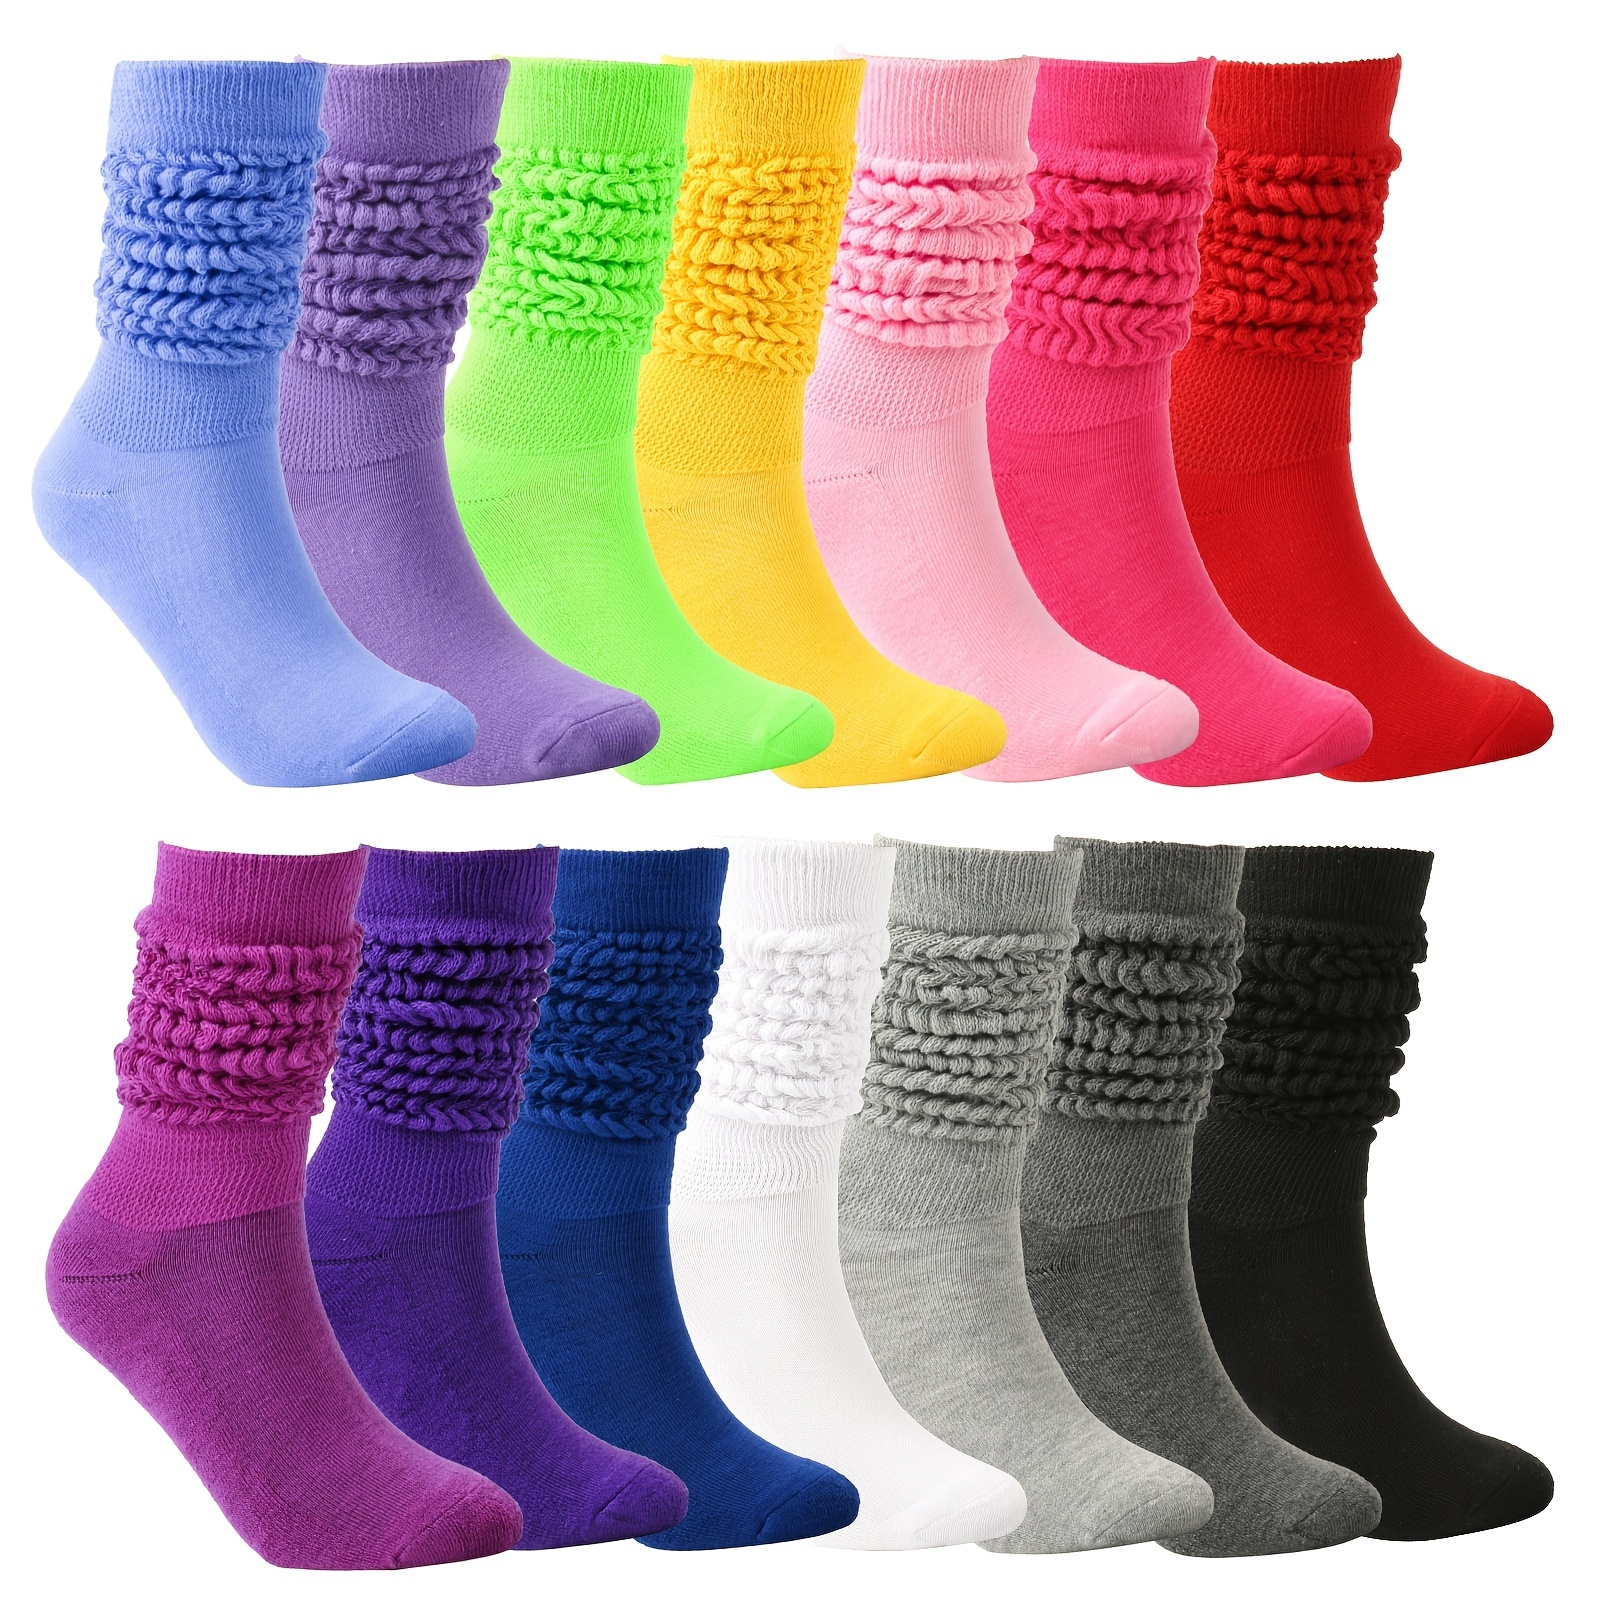 

Thick & Thermal Knee High Socks, Knit Style Solid Color Calf Socks, Women's Stockings & Hosiery